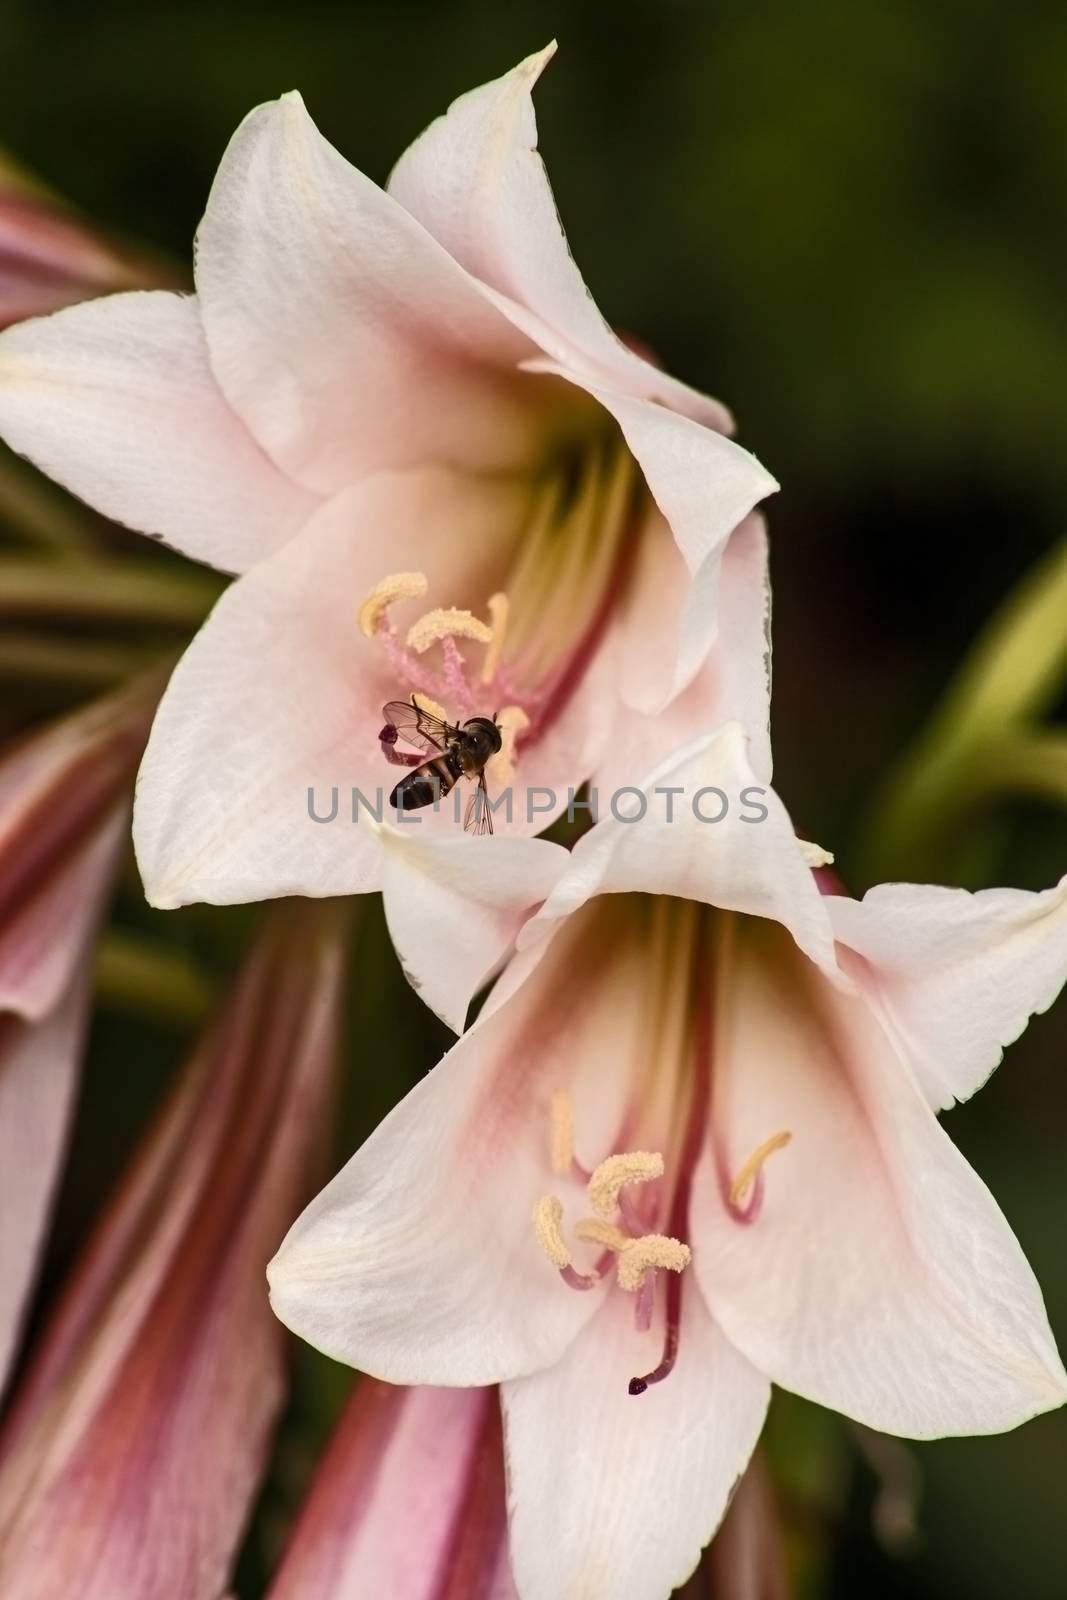 The Vaal River Lily (Crinum bulbispermum) originates from South Africa where it naturally occurs on river banks and floodplains but is widely cultivated in gardens and as potted plants